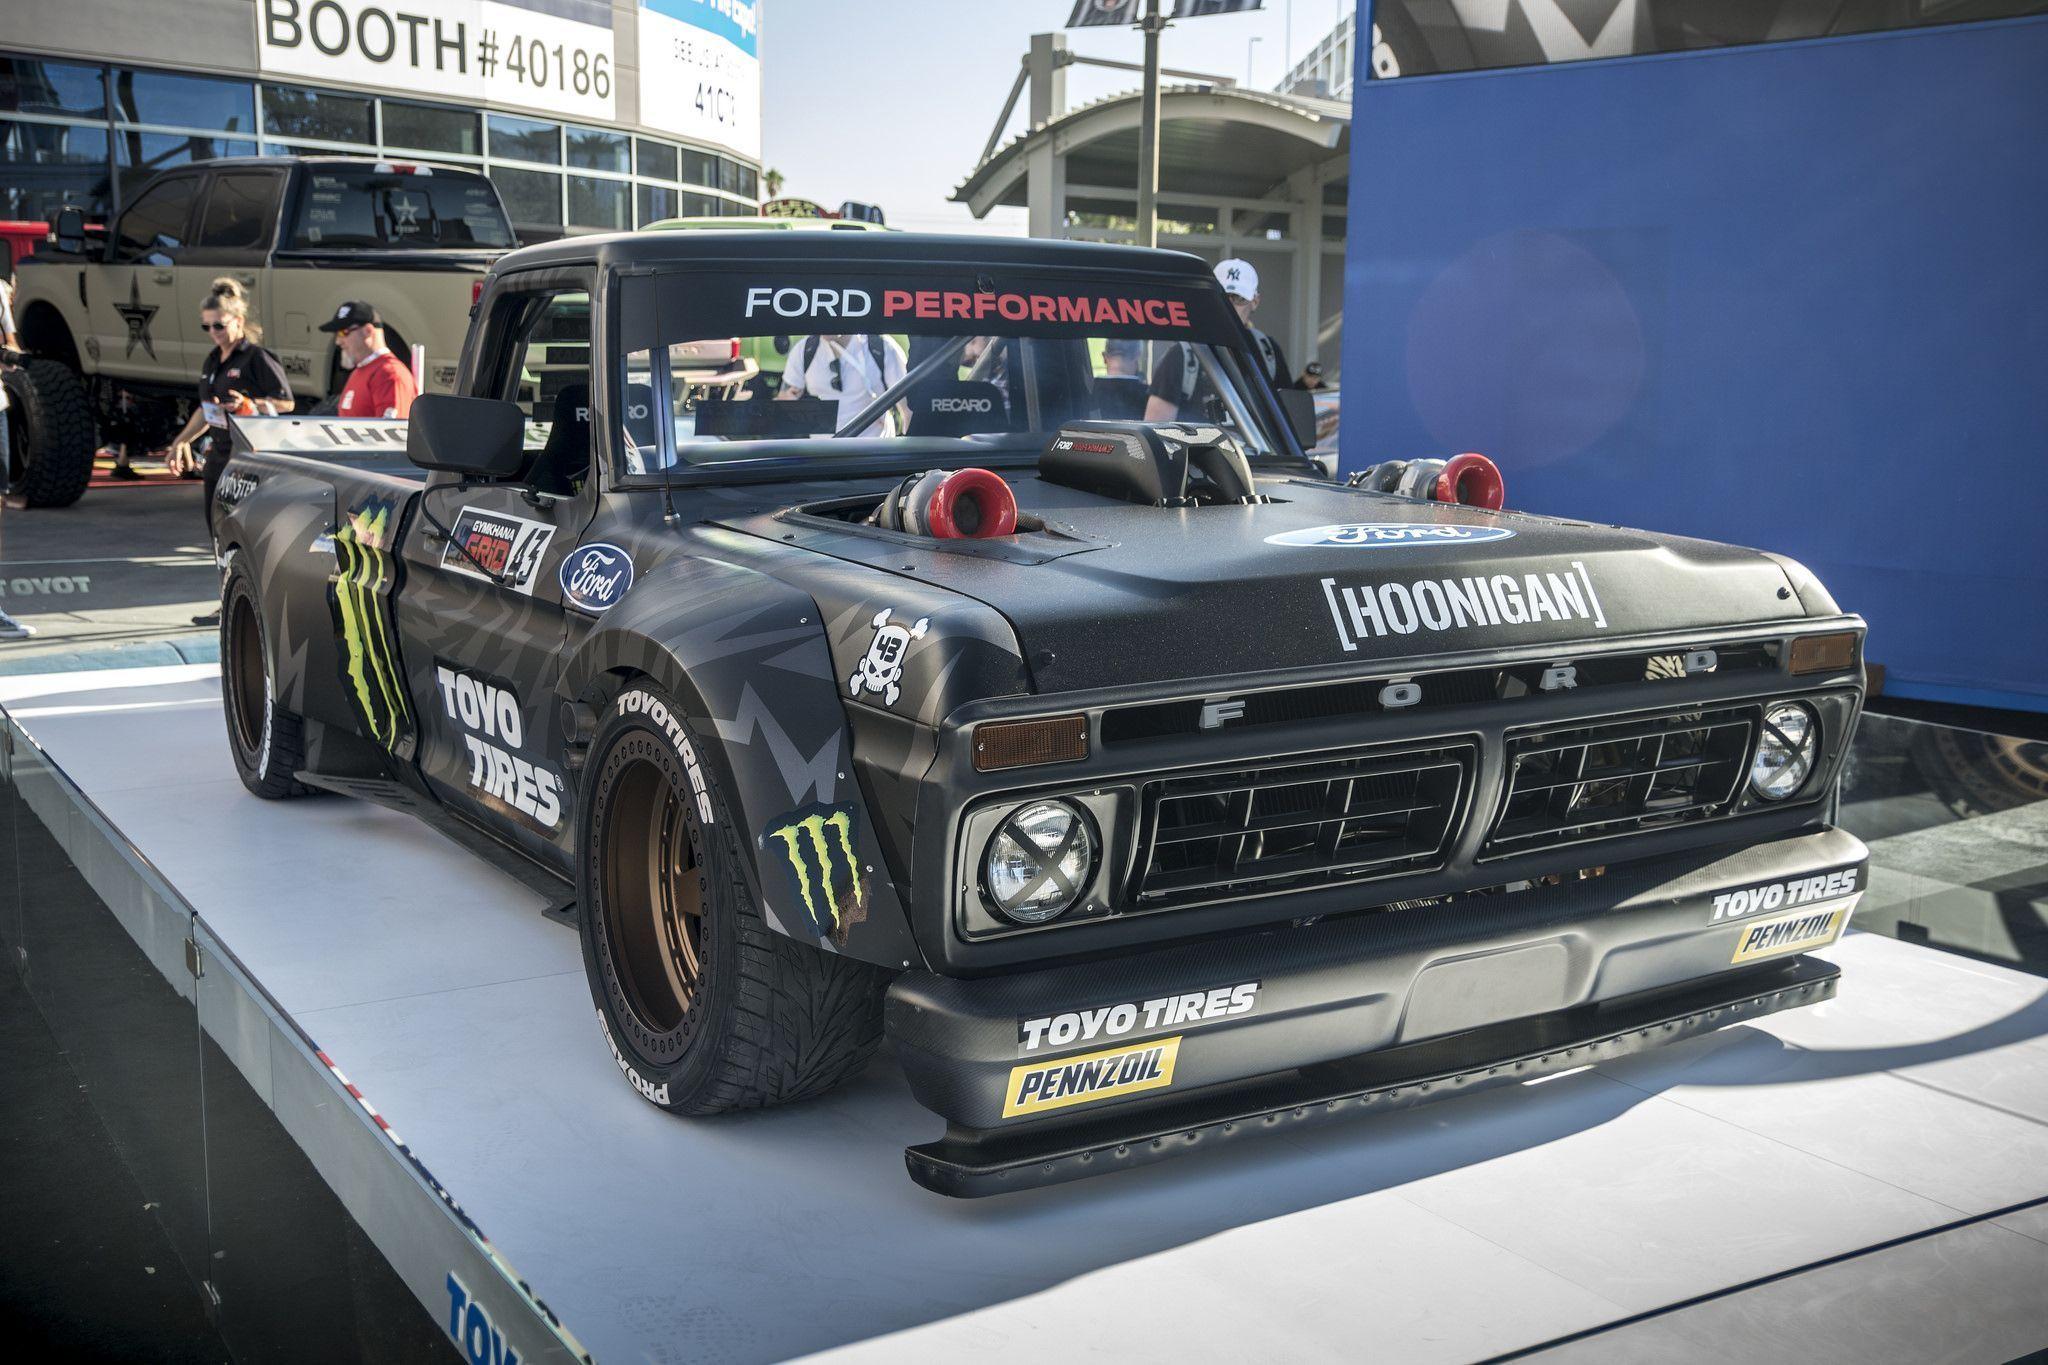 Ken Block's Hoonitruck in all it's glory!. All Day, Every